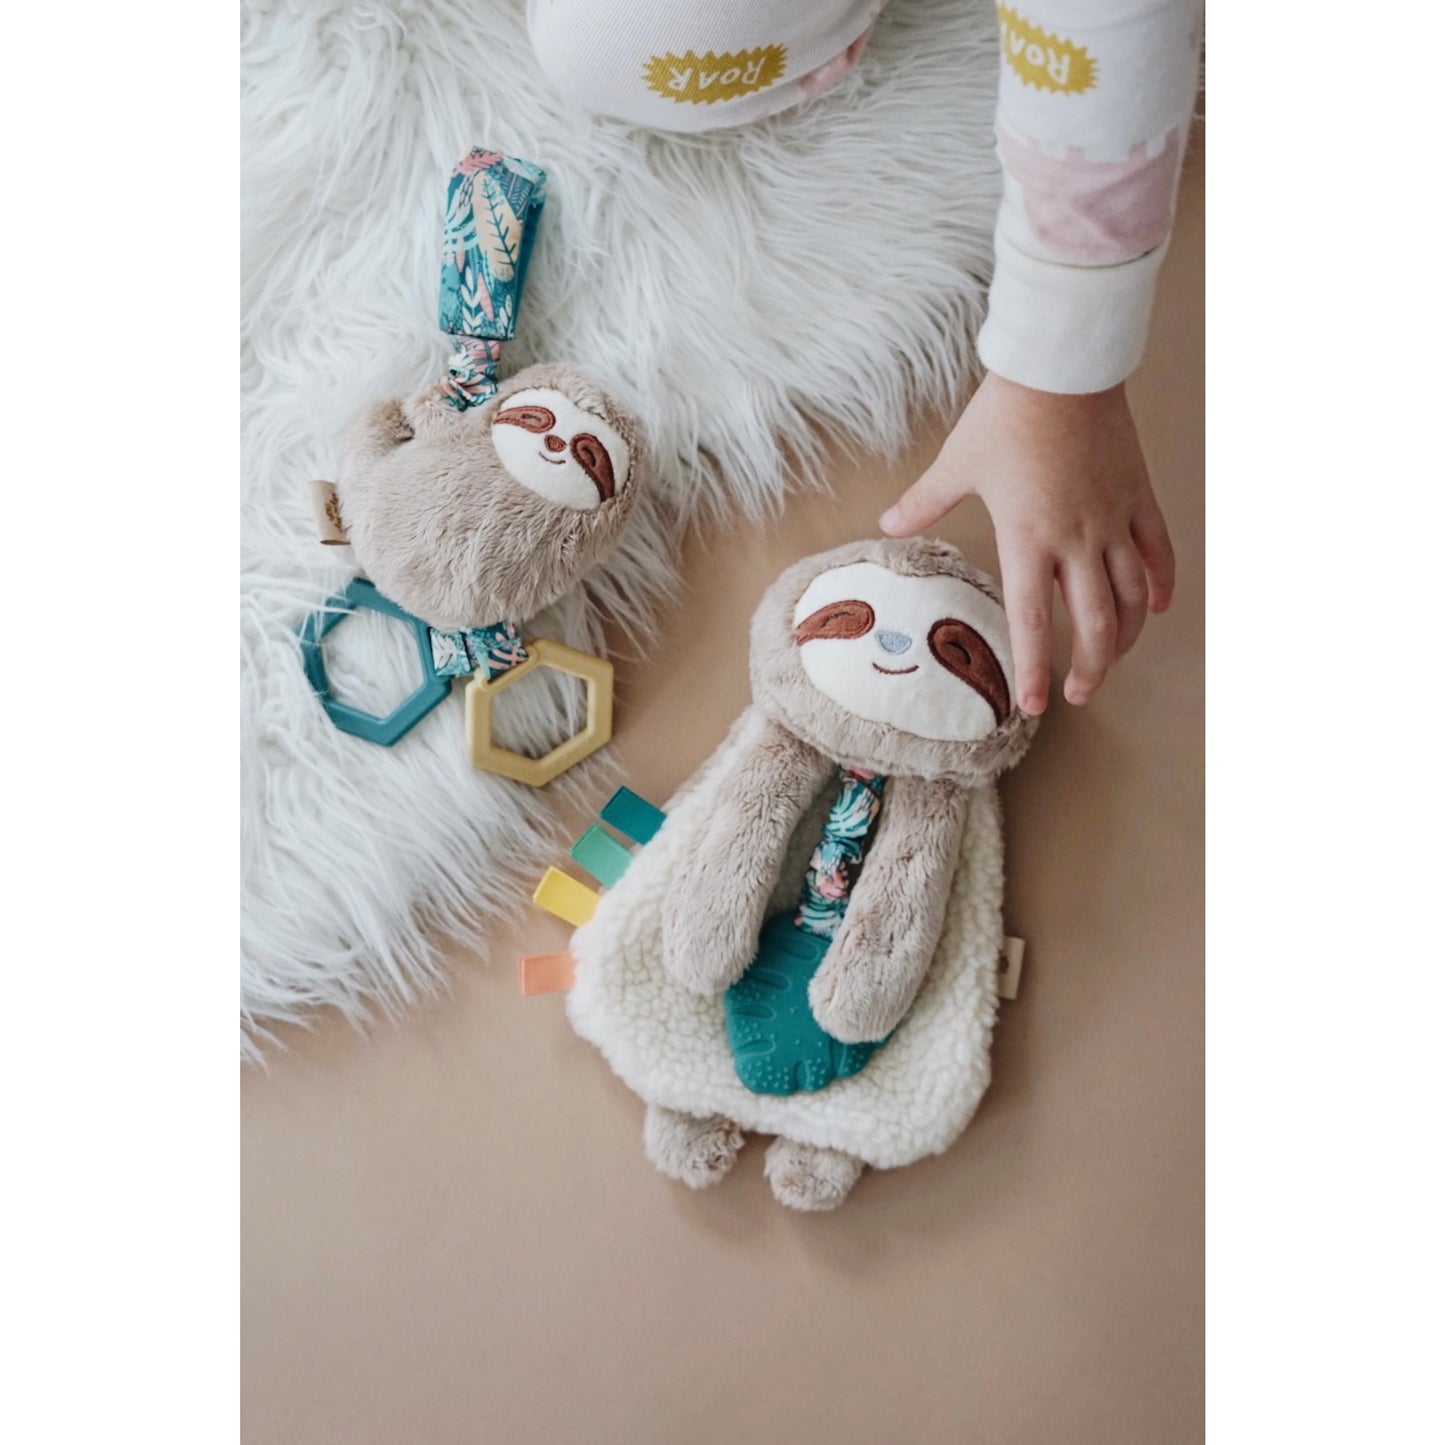 Itzy Friends Lovey Plush with Silicone Teether Toy